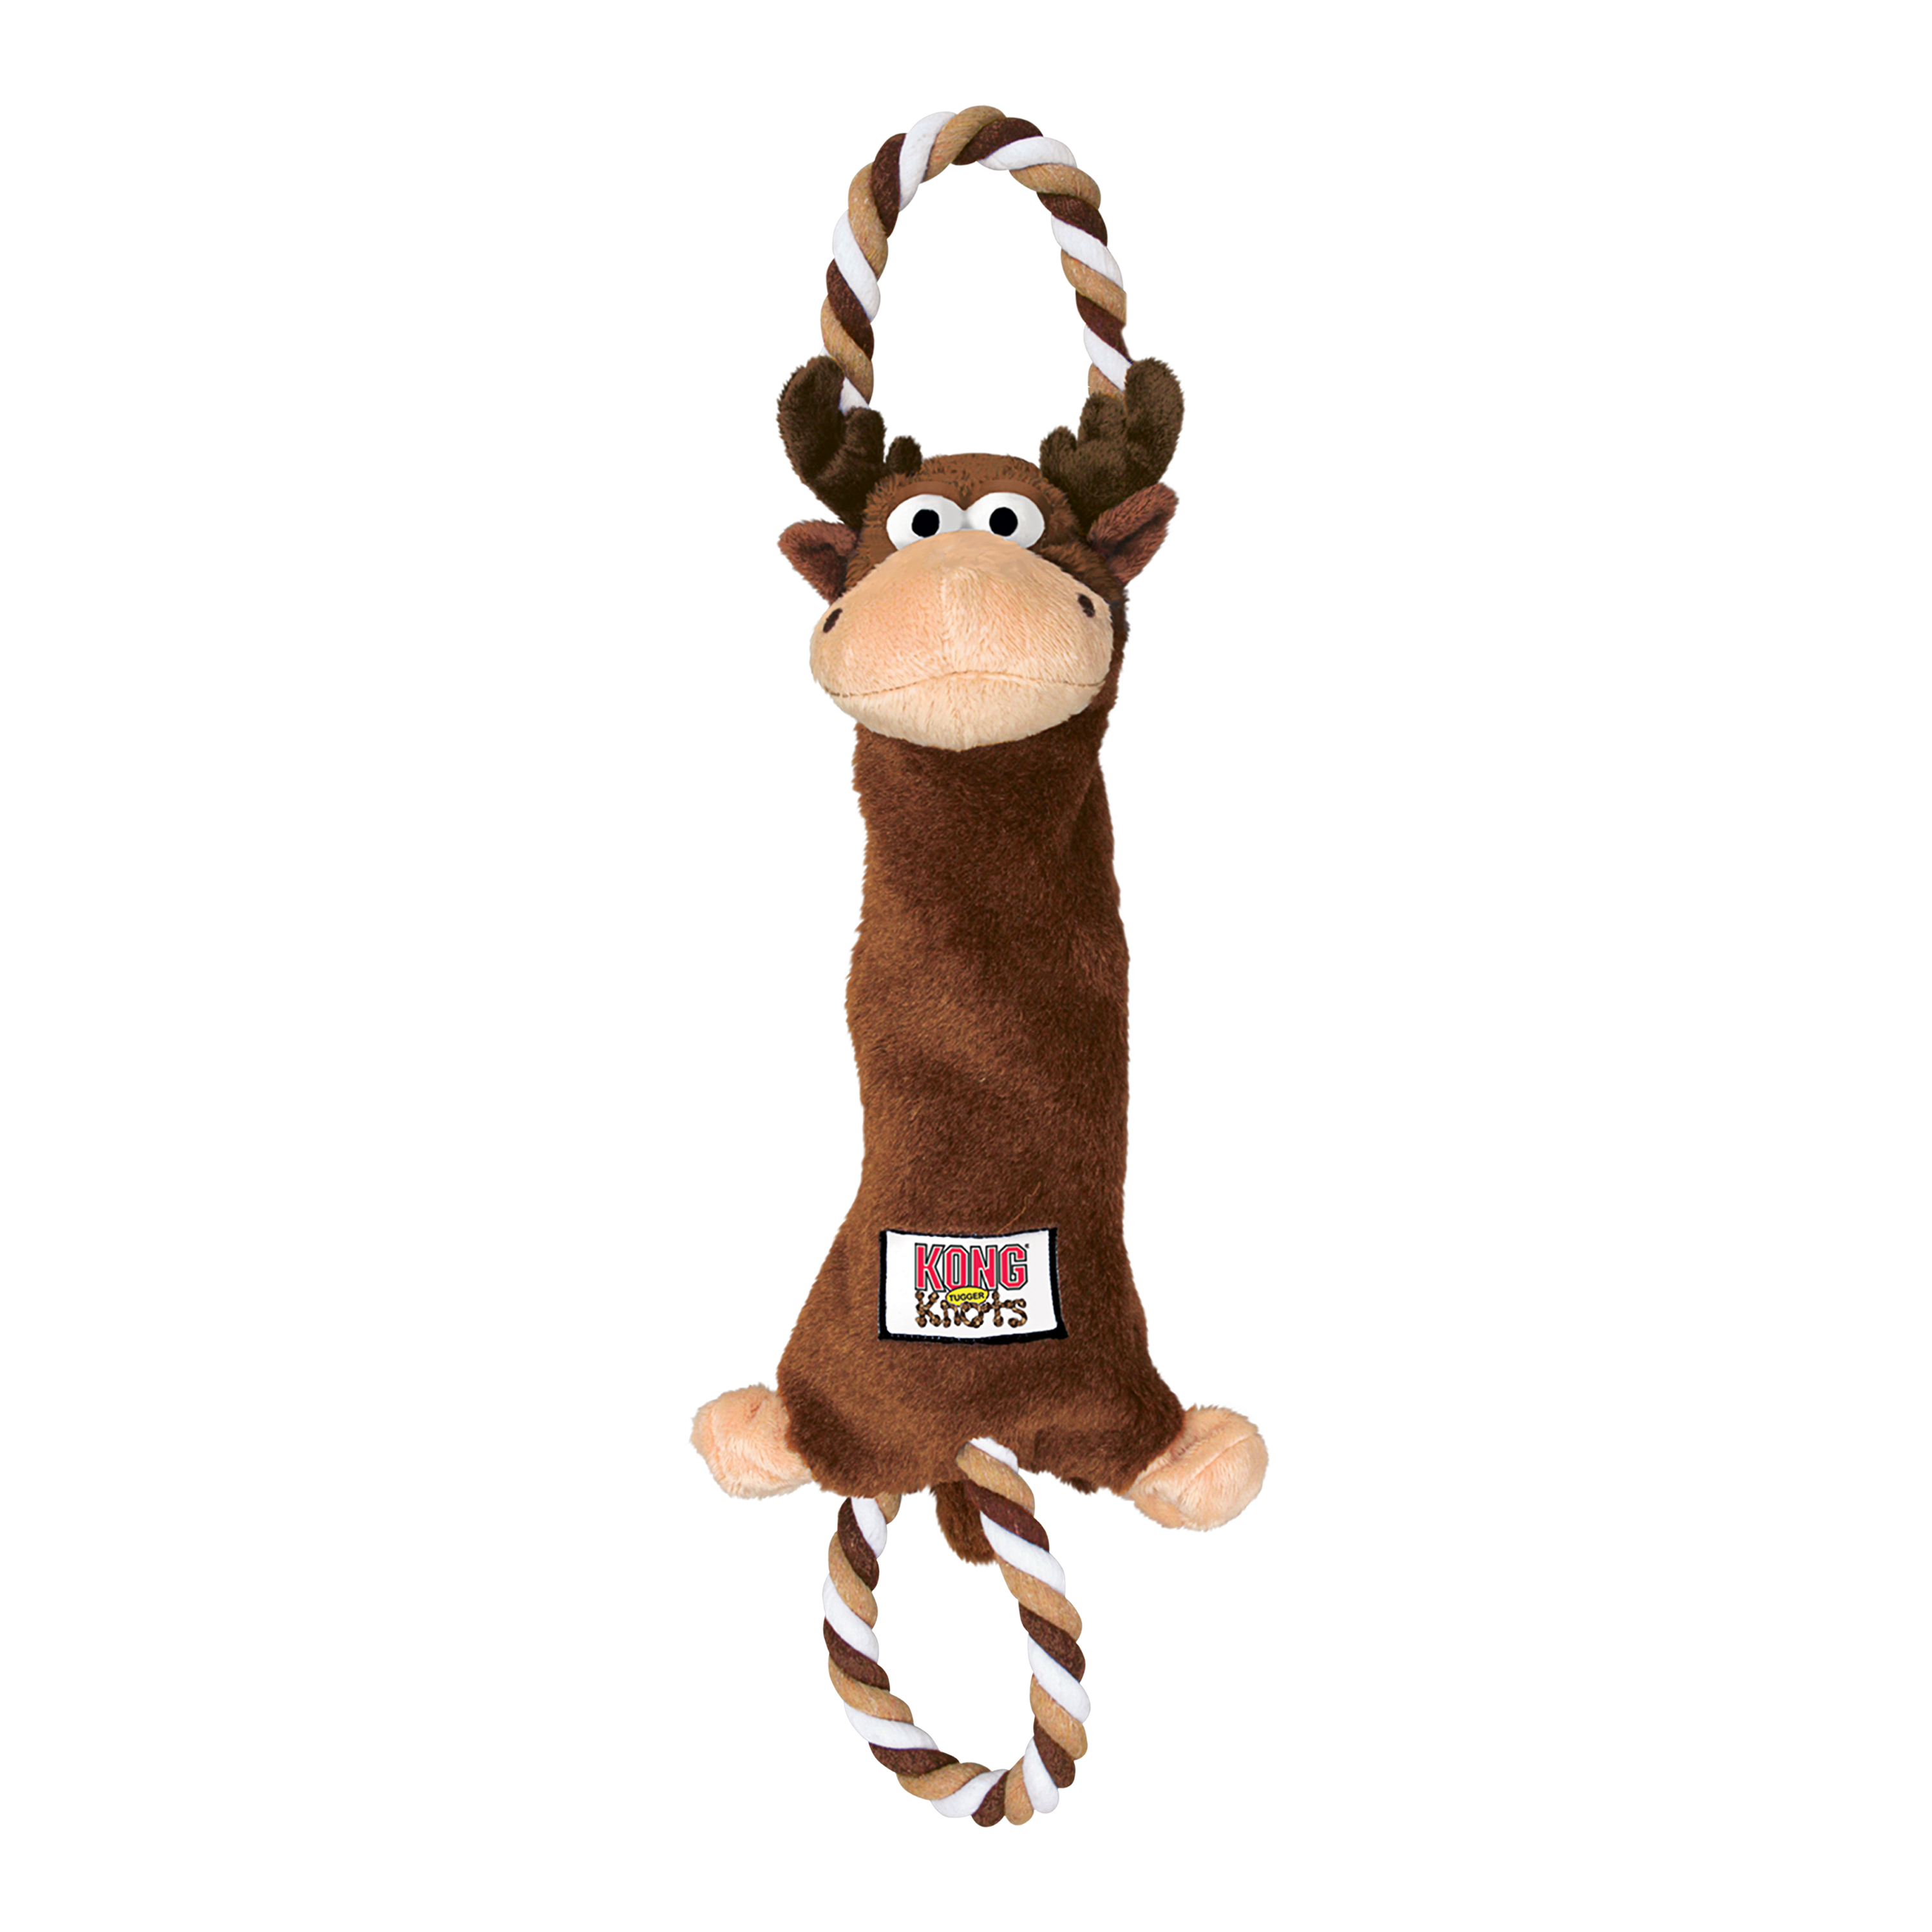 Tugger Knots Moose offpack product image